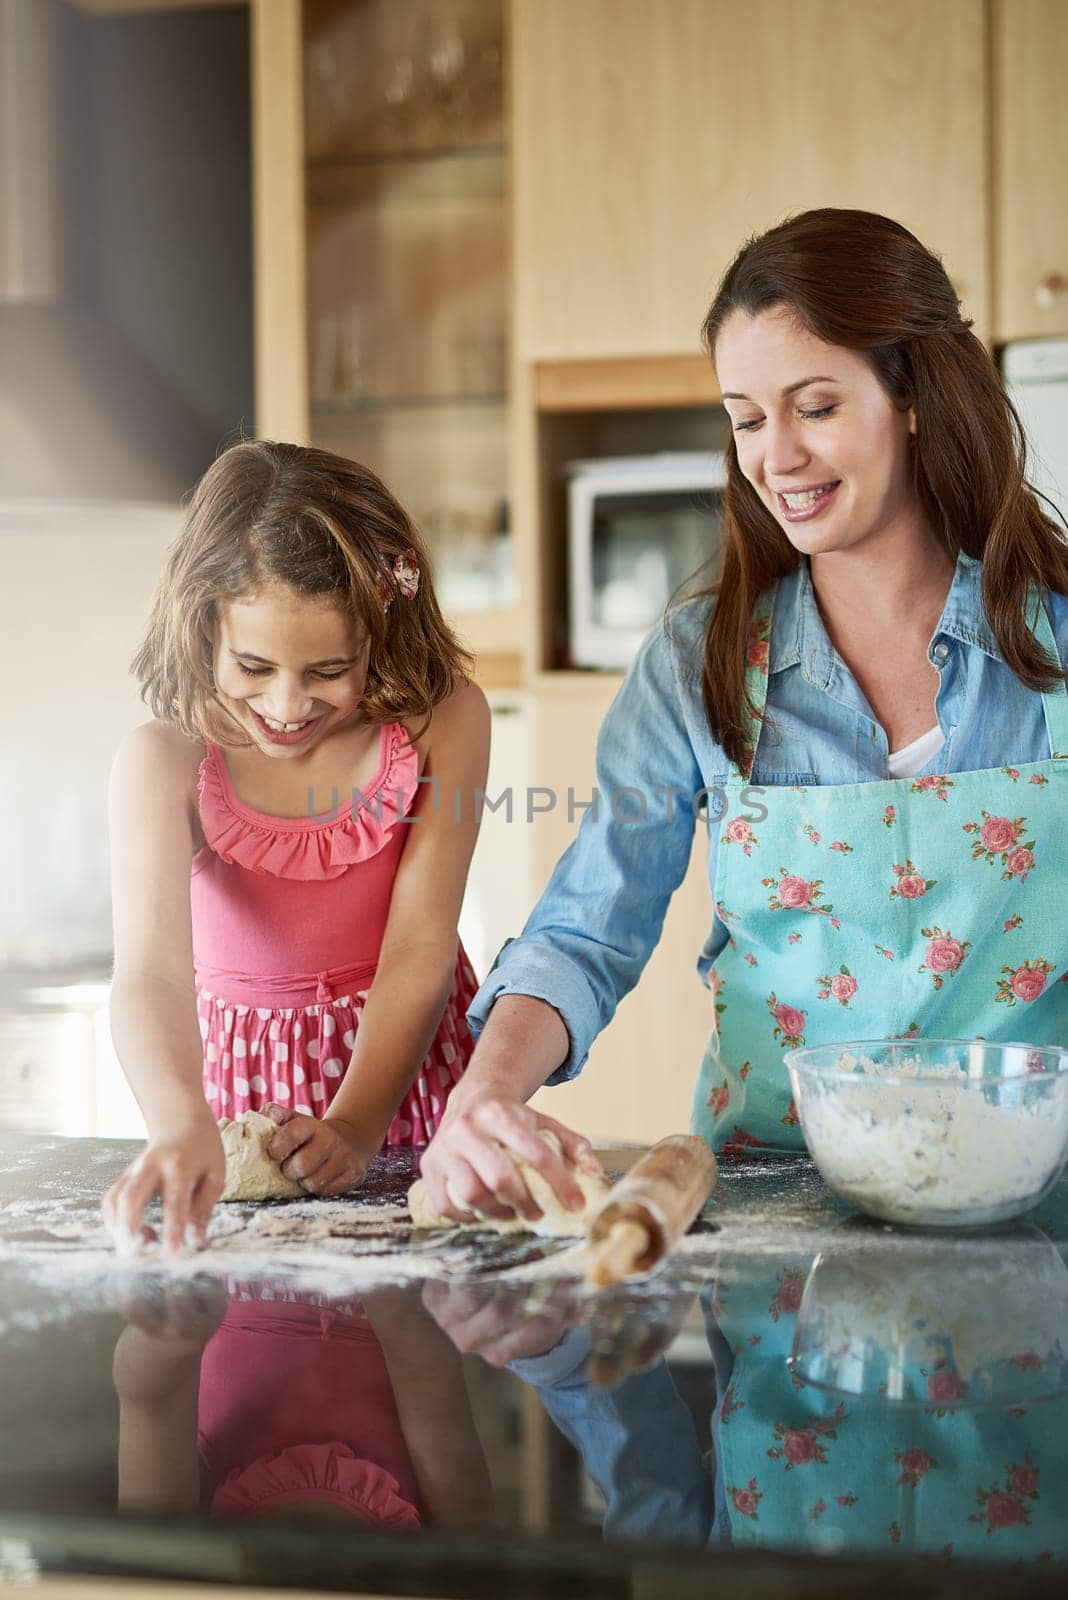 Mother, child and baking dough in kitchen or learning support for breakfast, bread or bonding. Woman, daughter and flour on counter or teaching girl in home for homemade cookies, dessert or happiness.